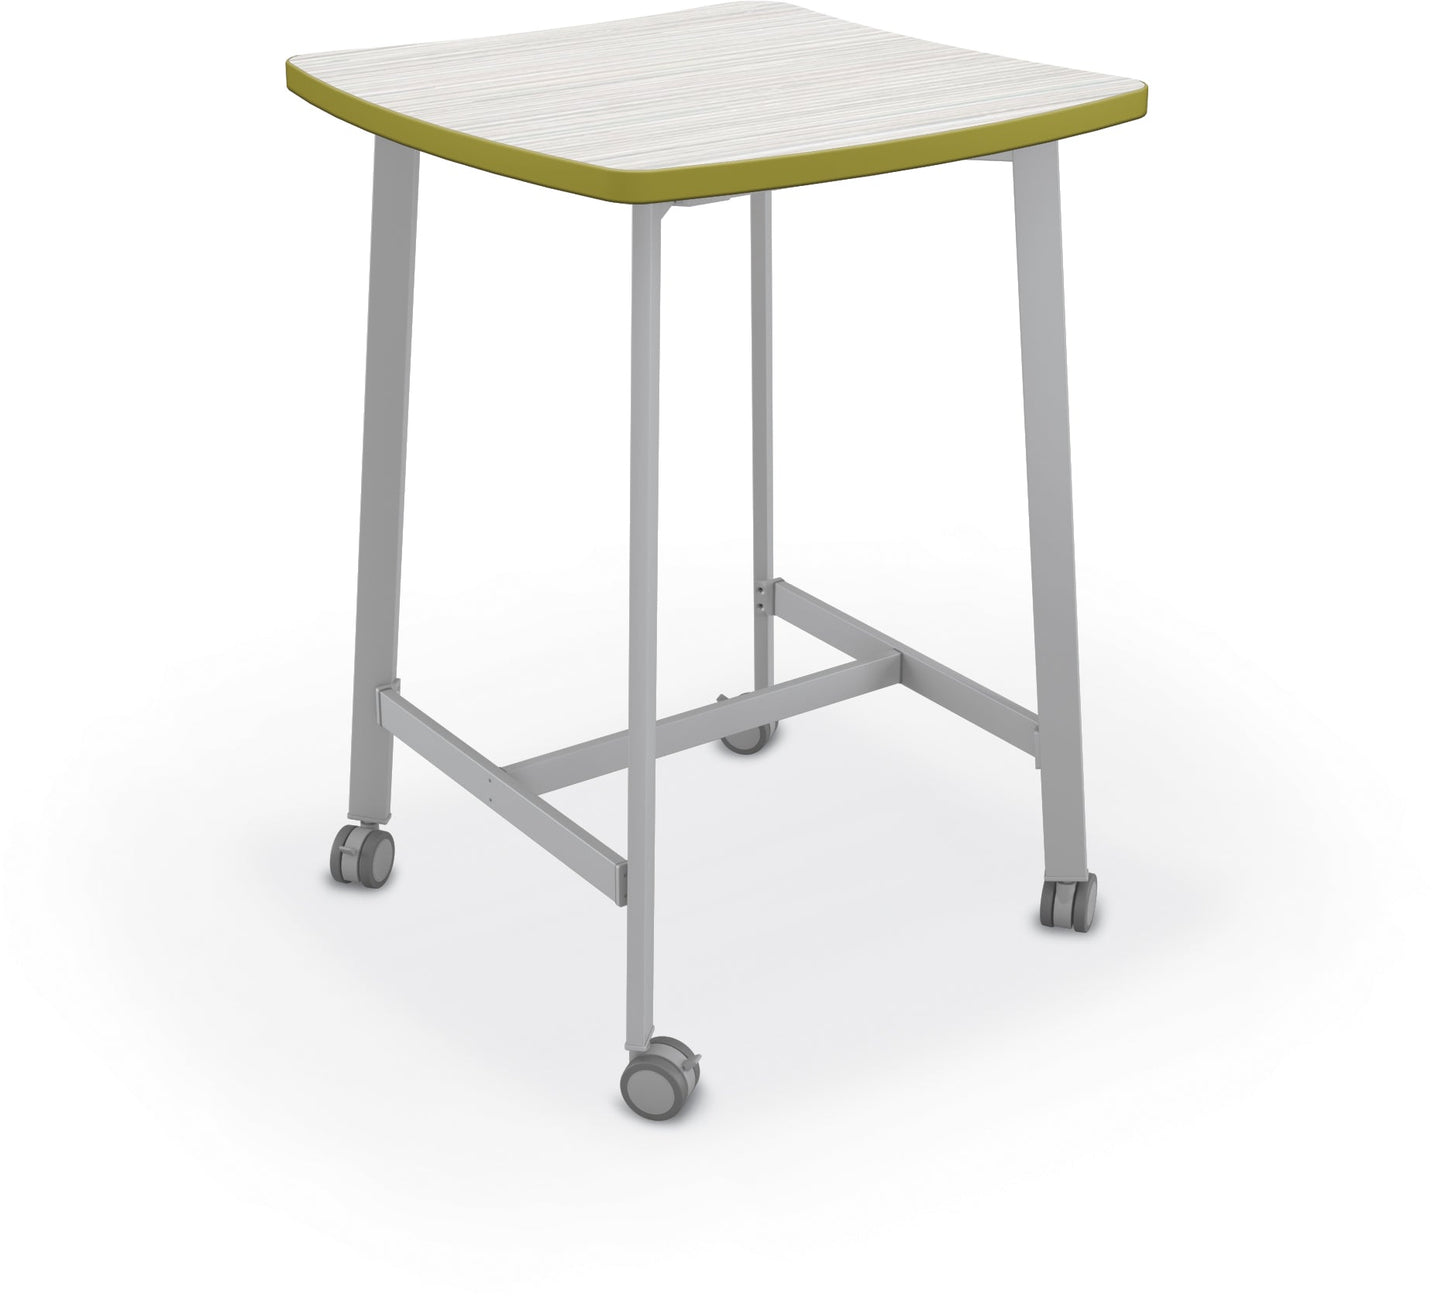 Mooreco Akt Table – Wavy Square, Laminate Top, Fixed Height Available in 29"H, 36"H, or 42"H - SchoolOutlet